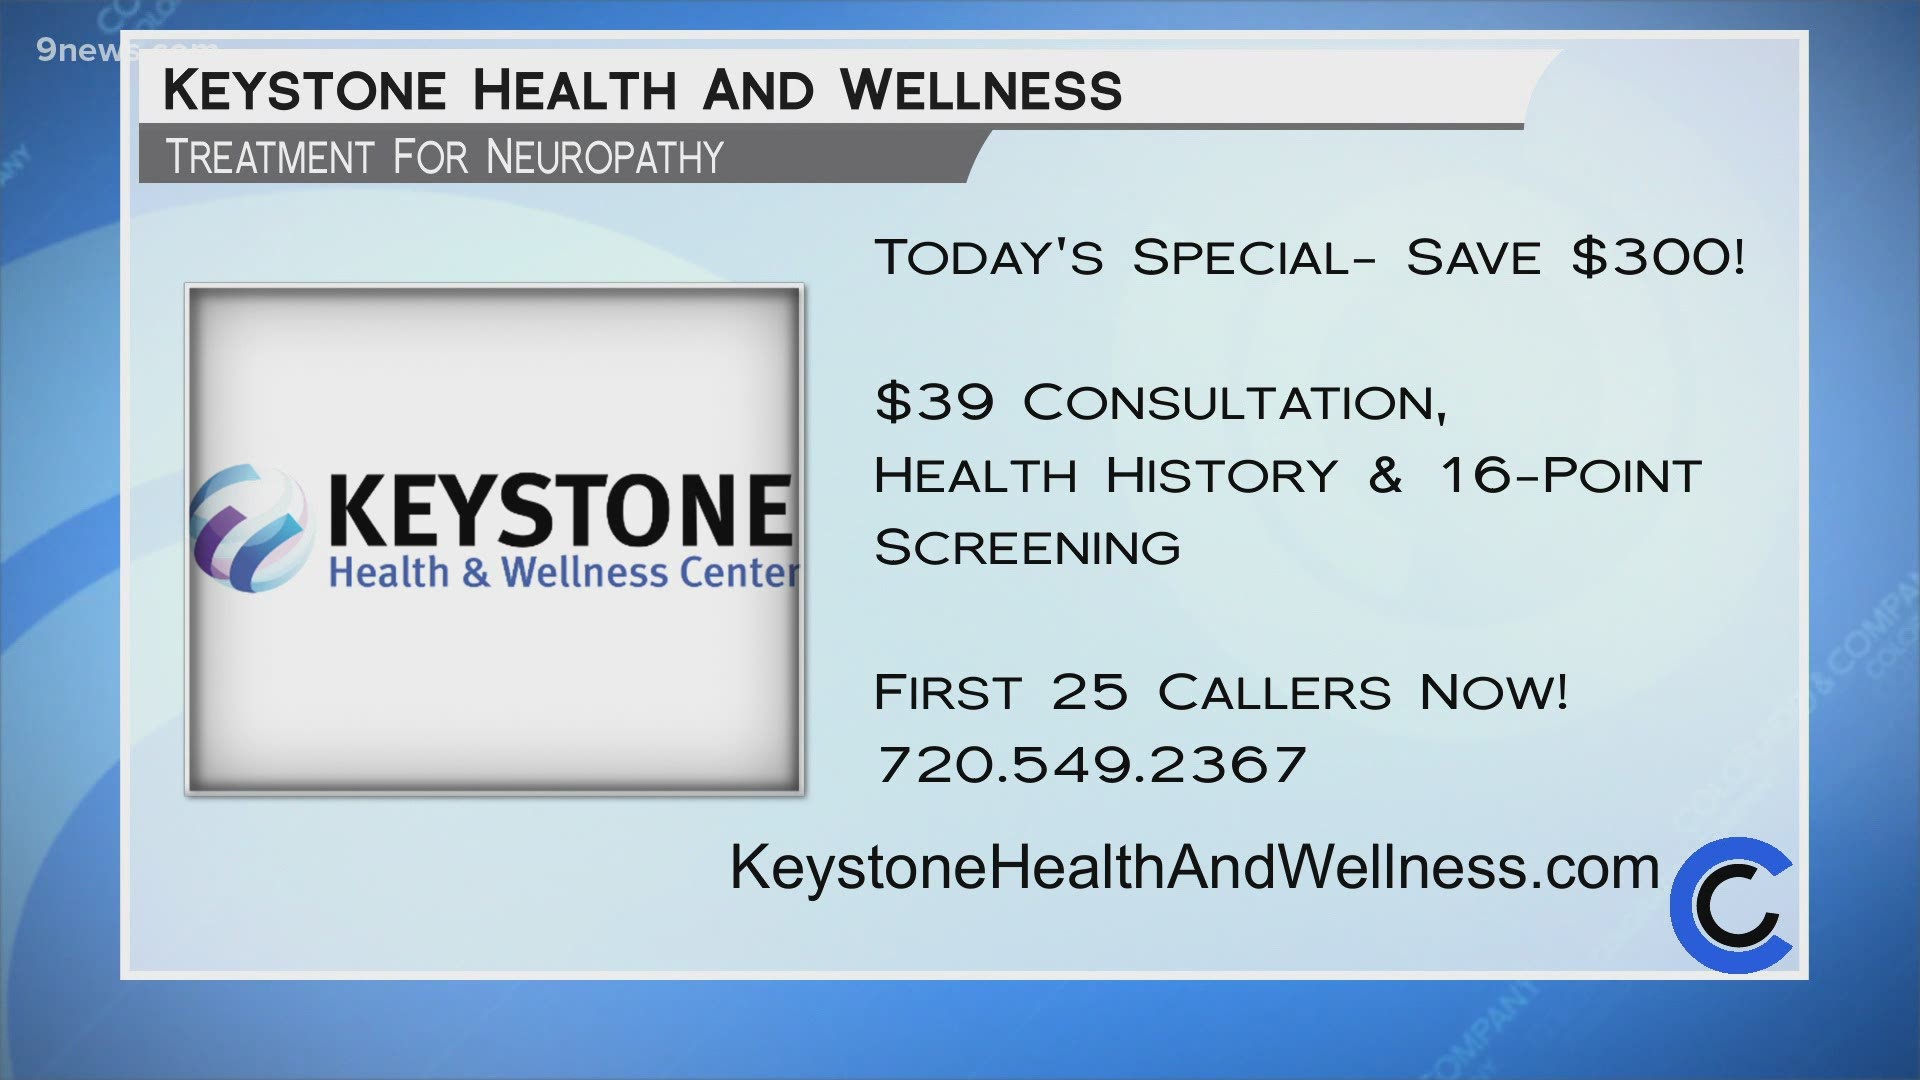 The first 25 callers can get a consultation, health history eval., and a 16 point nerve damage screening for just $39. Learn more at KeystoneHealthandWellness.com.